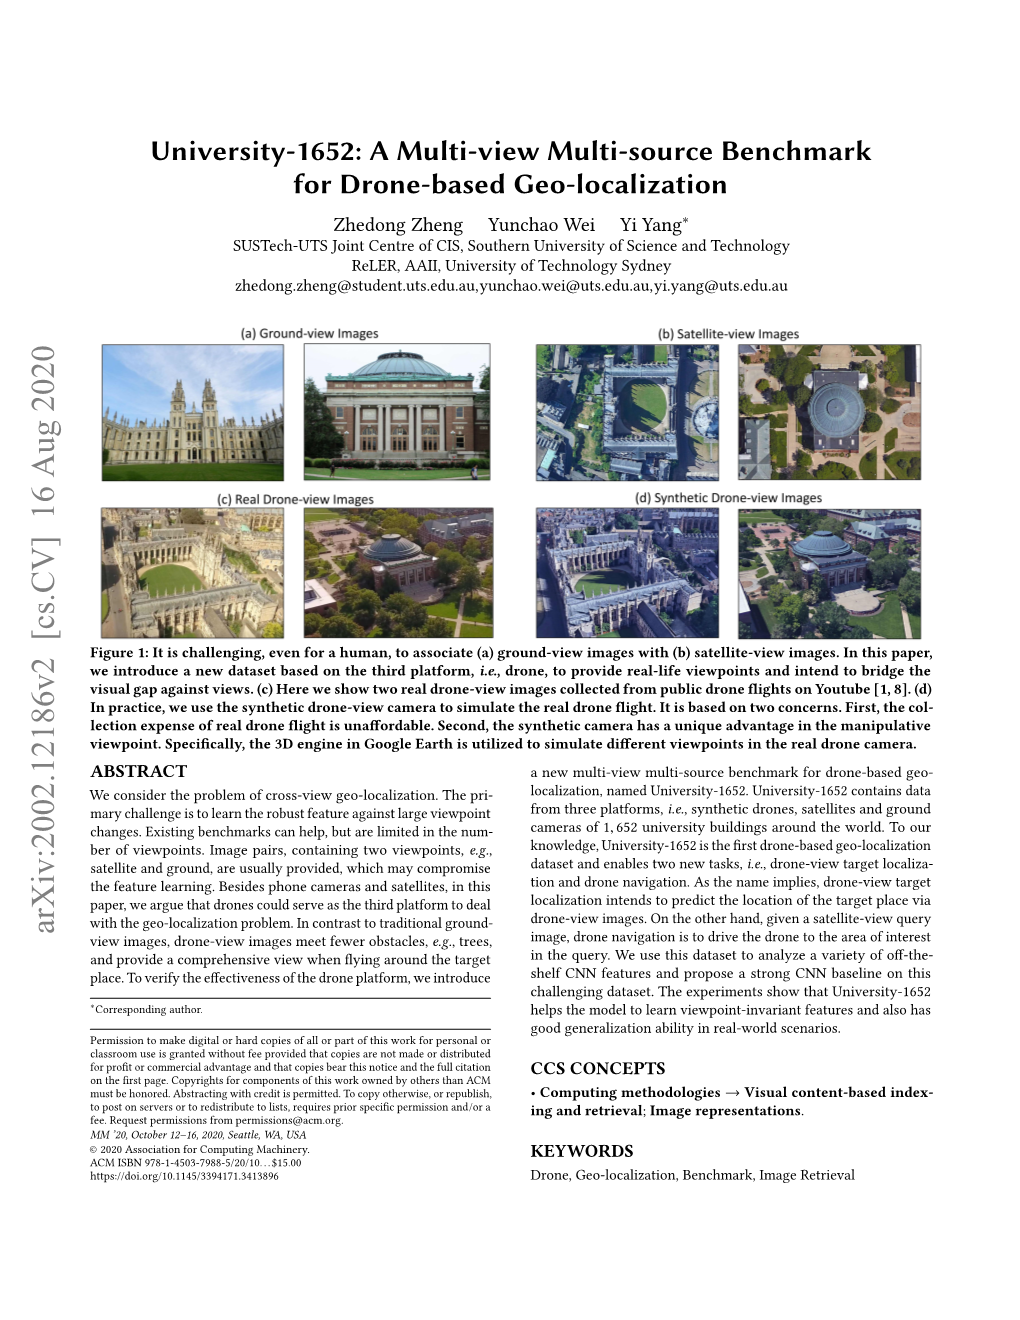 A Multi-View Multi-Source Benchmark for Drone-Based Geo-Localization